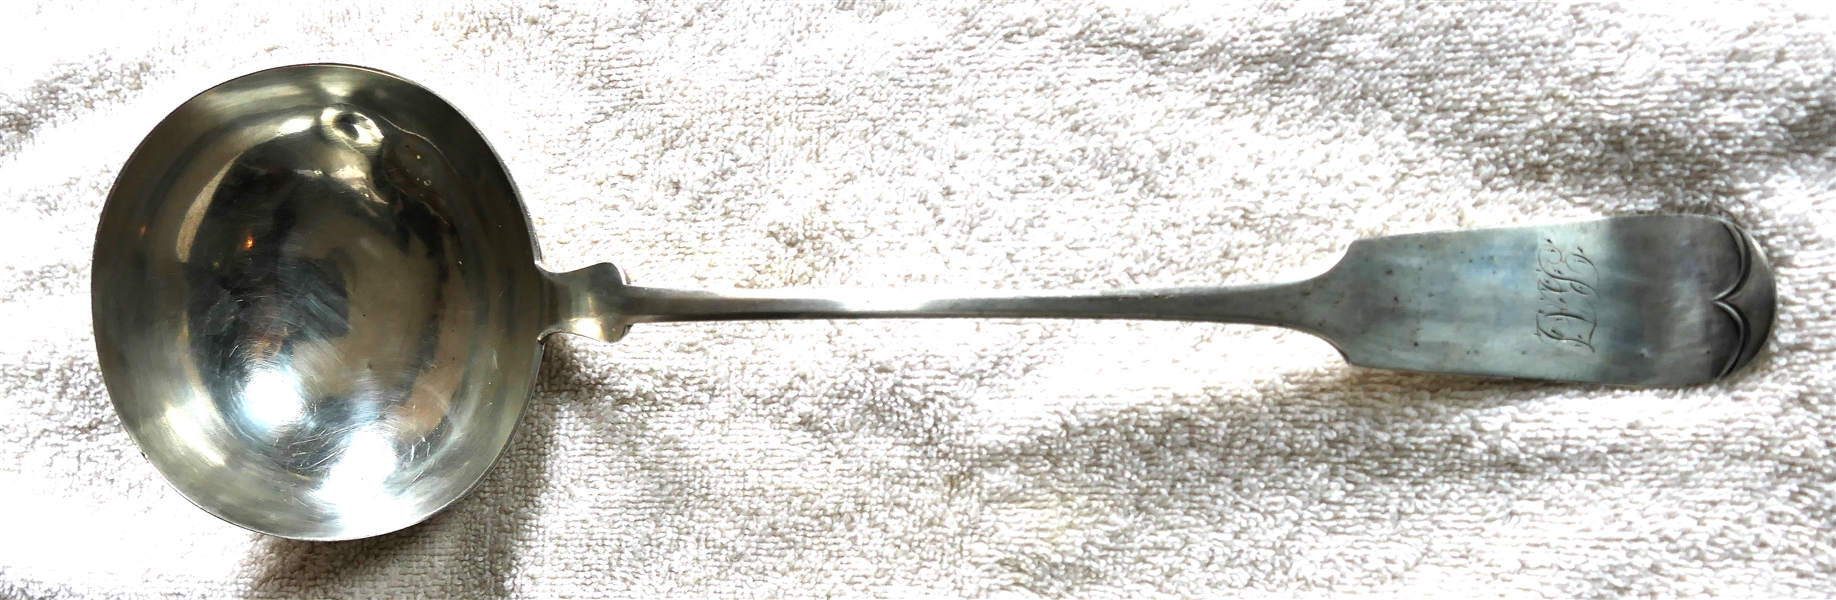 American Coin Silver Fiddle Handle Ladle by Bailey & Co. Philadelphia, c. 1848-1856 - Monogrammed Handle - Measures 13 1/2" Long Bowl 4" Across